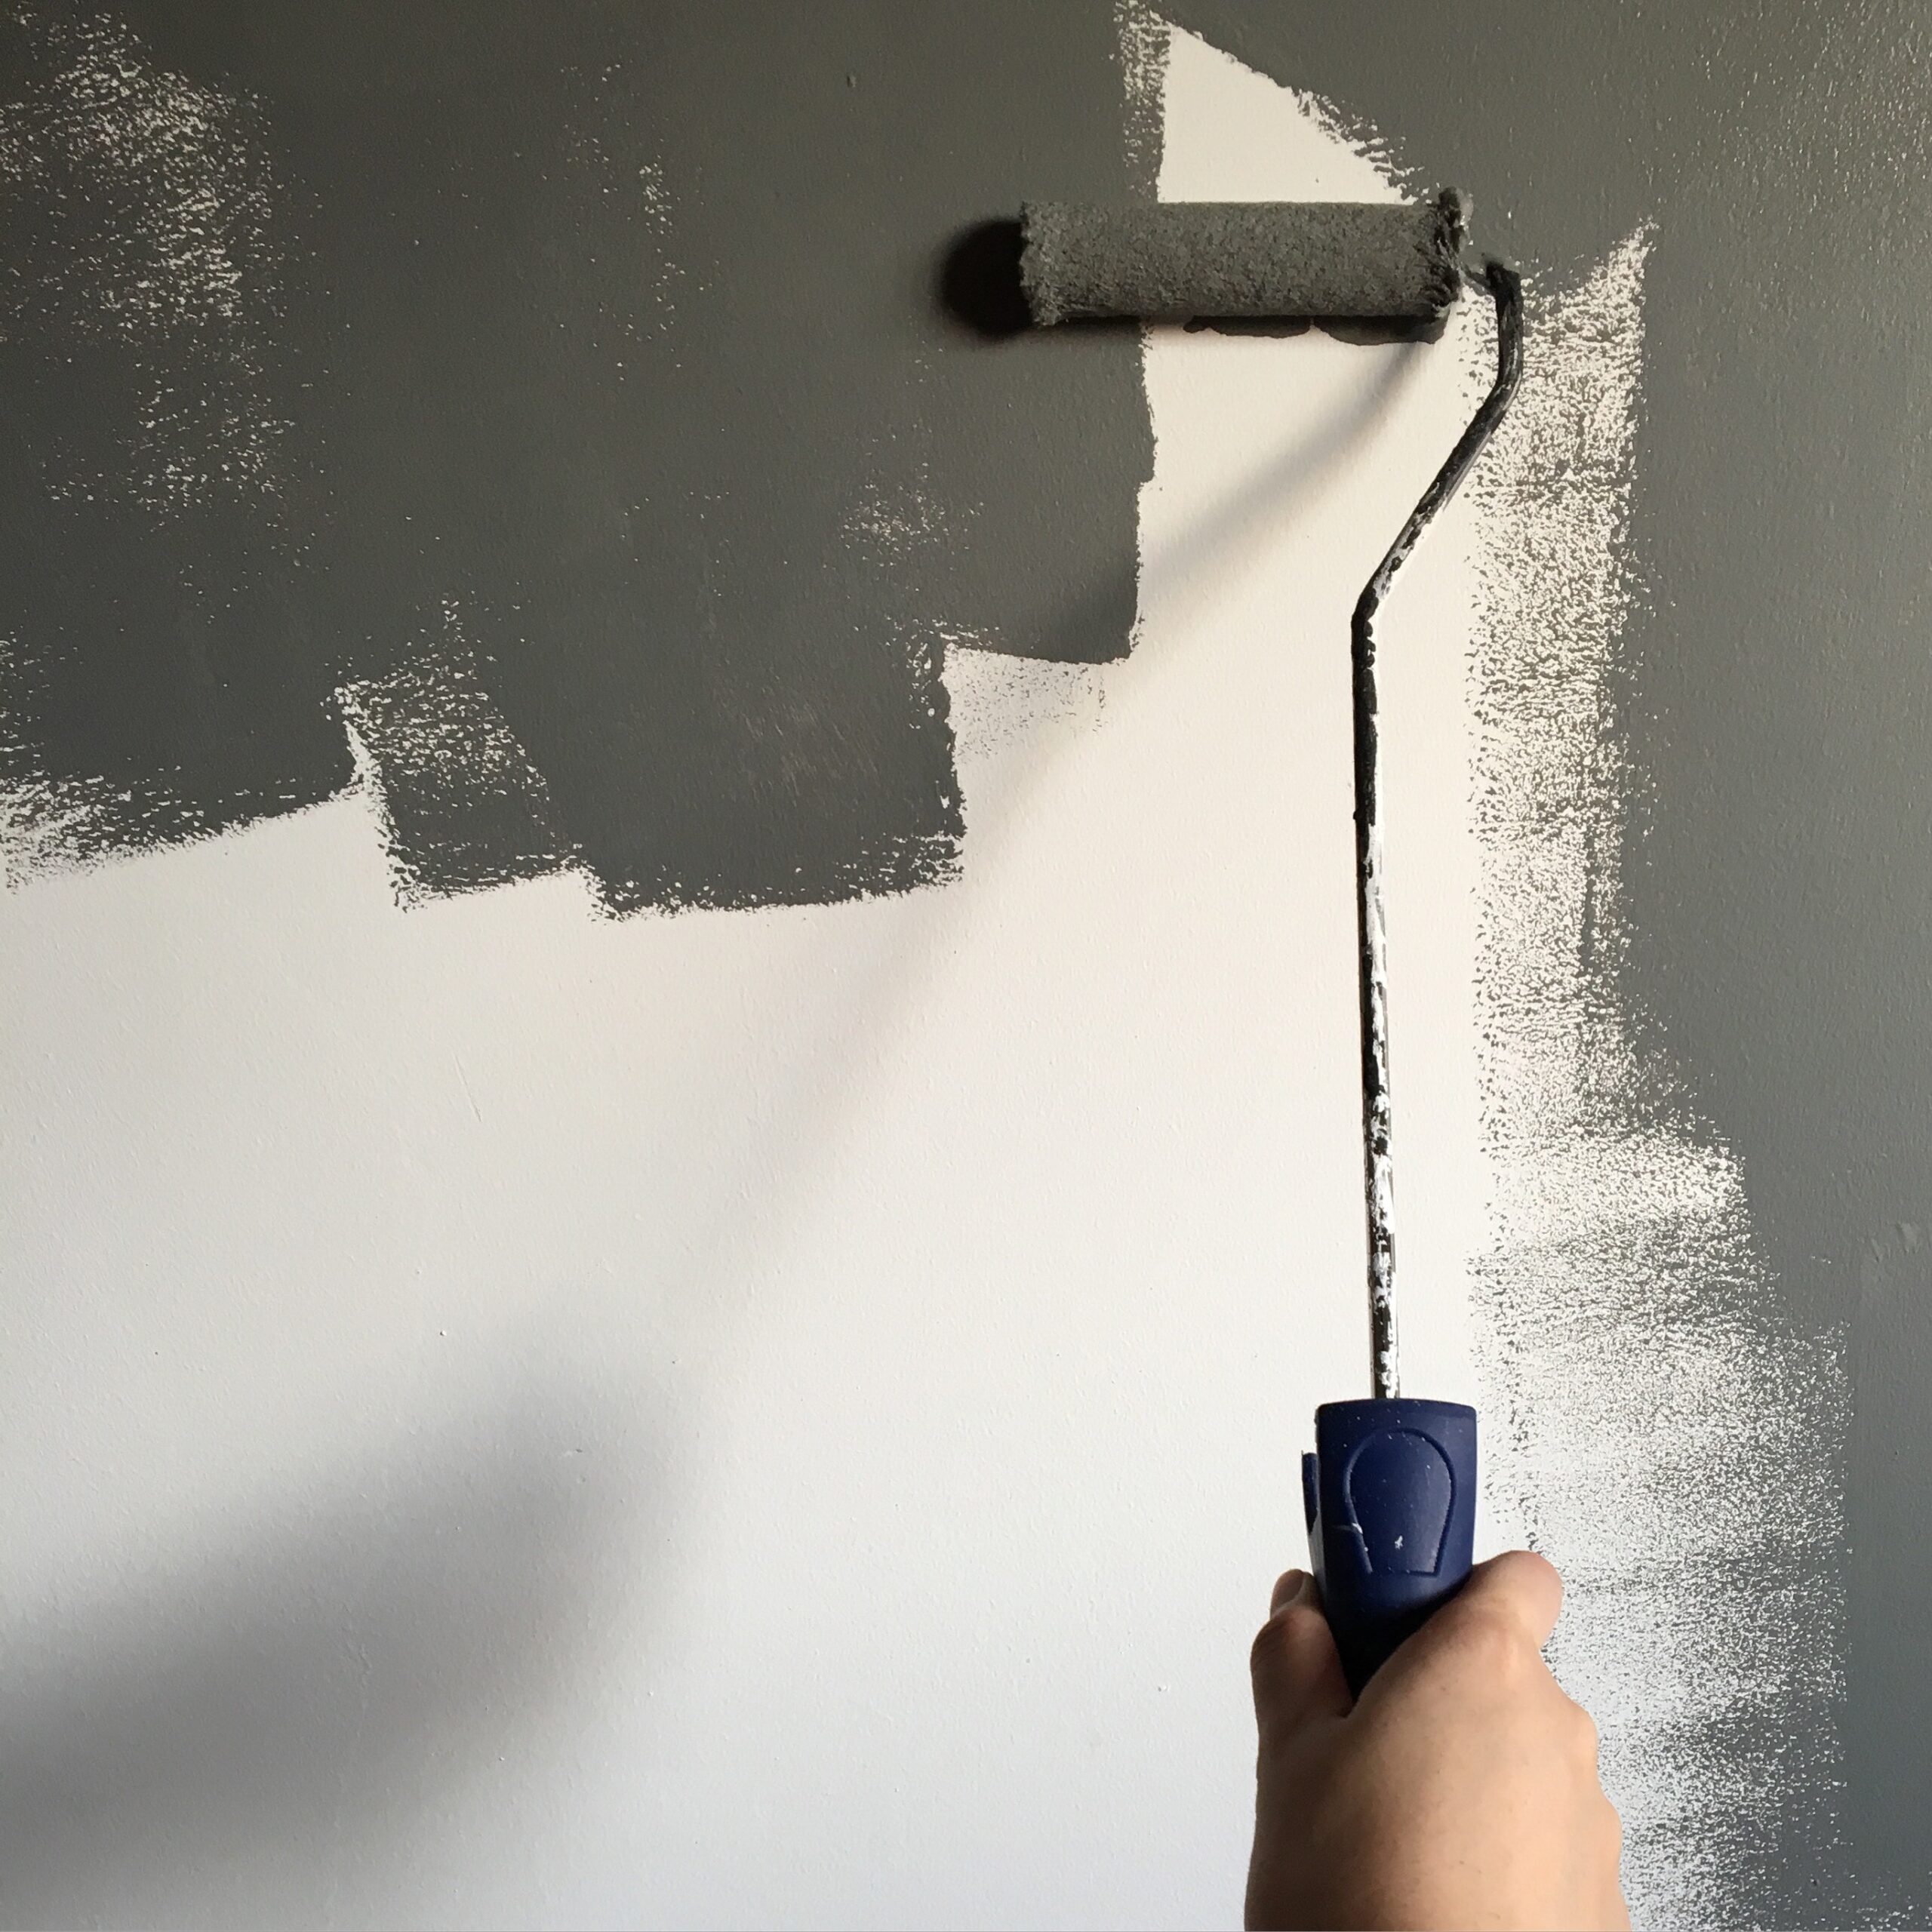 A hand holding a paint roller while performing interior painting.